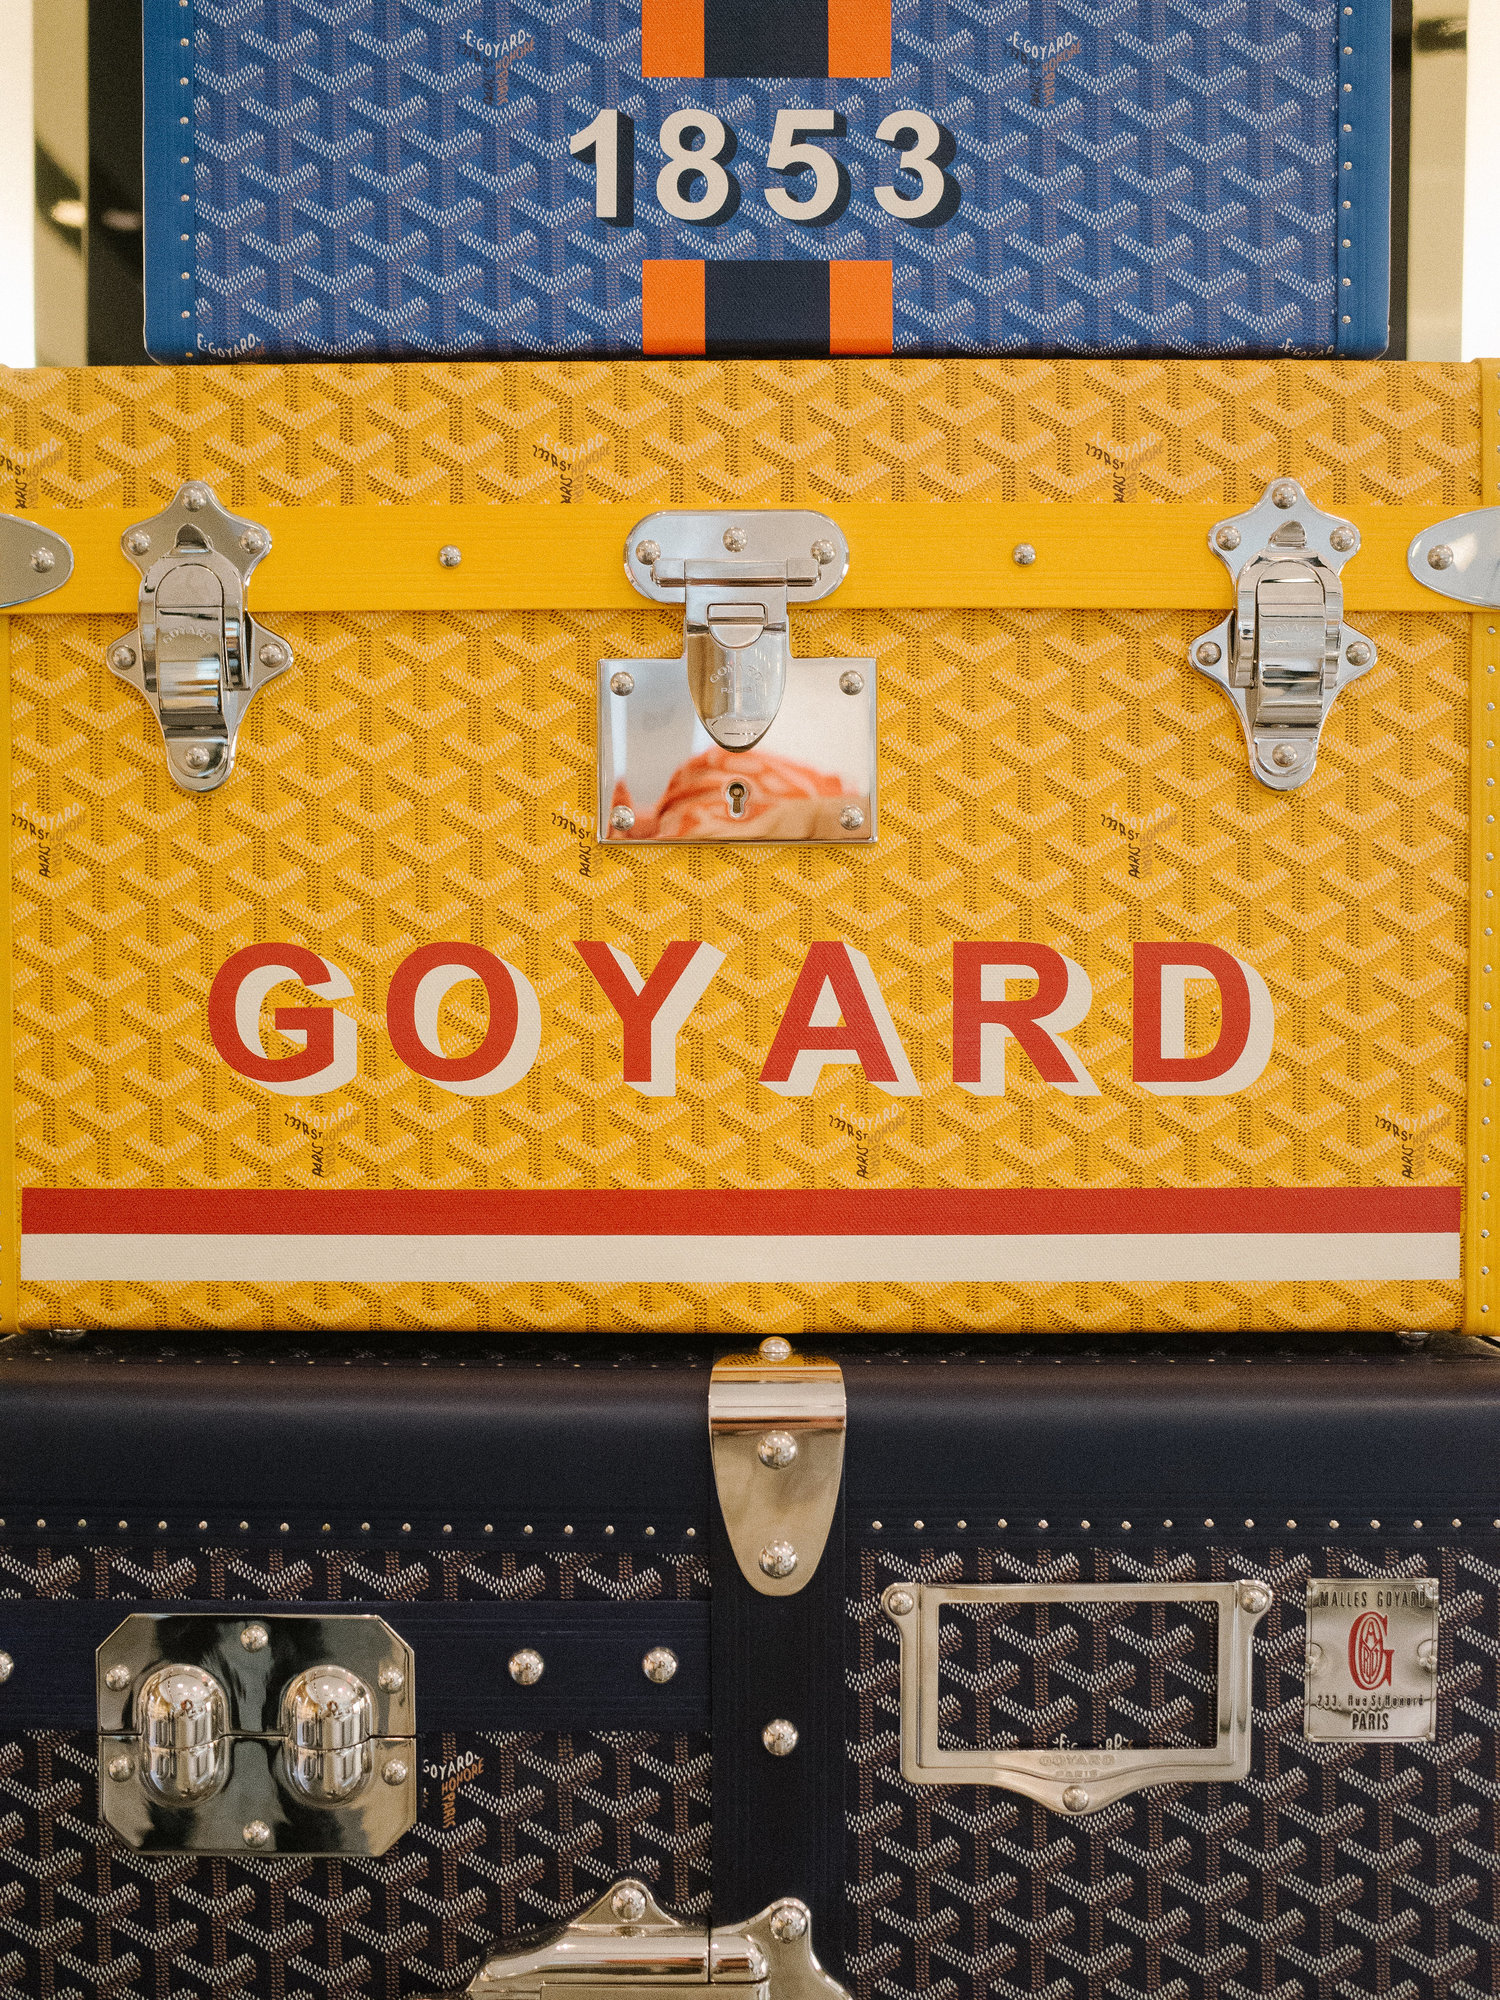 My Goyard 233 bag story from Bergdorf Goodman, and its review